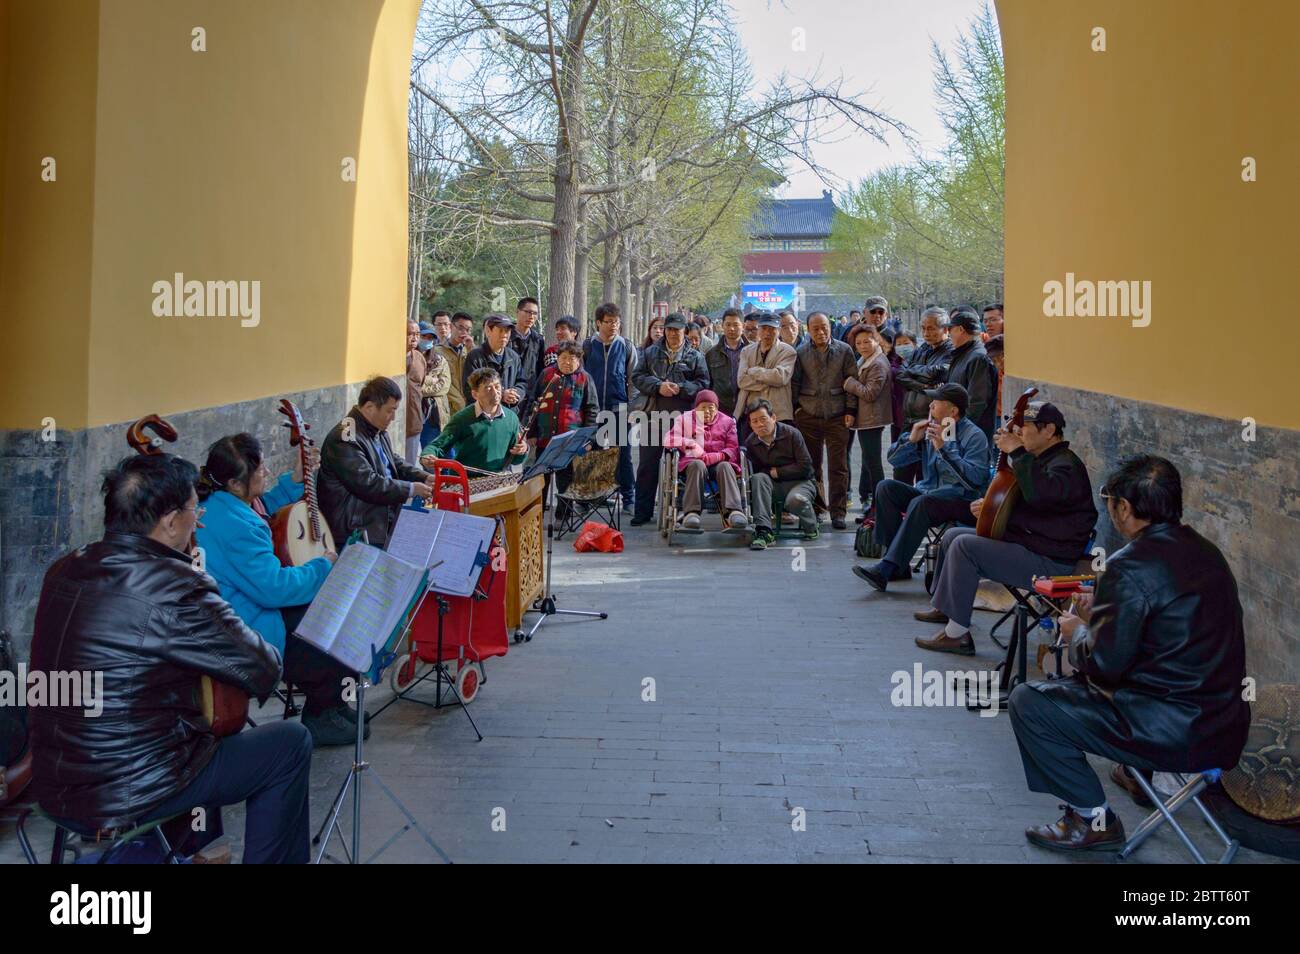 Beijing / China - April 5, 2015: A group of elder people performs traditional Chinese music surrounded by curious onlookers, at the Temple of Heaven P Stock Photo